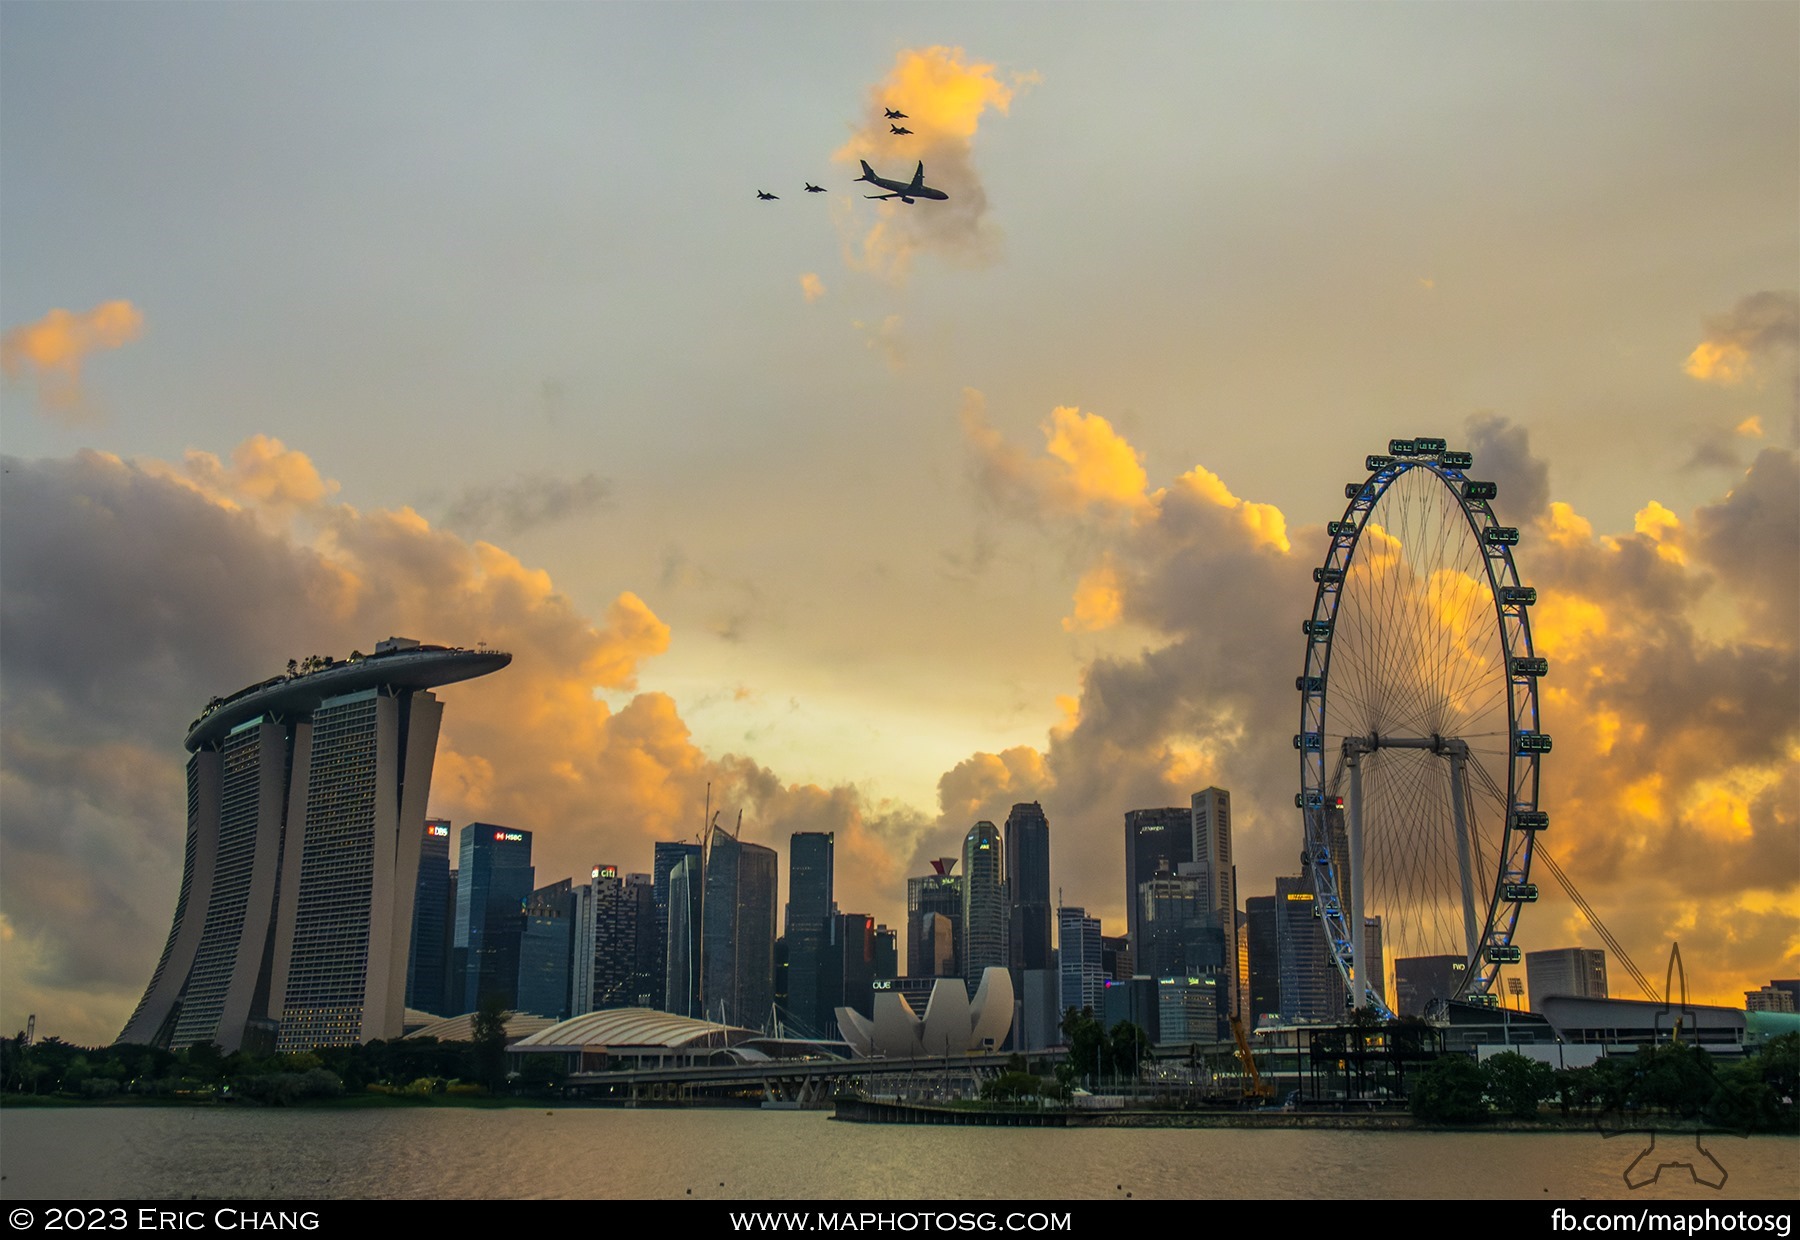 The MRTT and F-16 formation flies against a stunning Marina Bay backdrop.